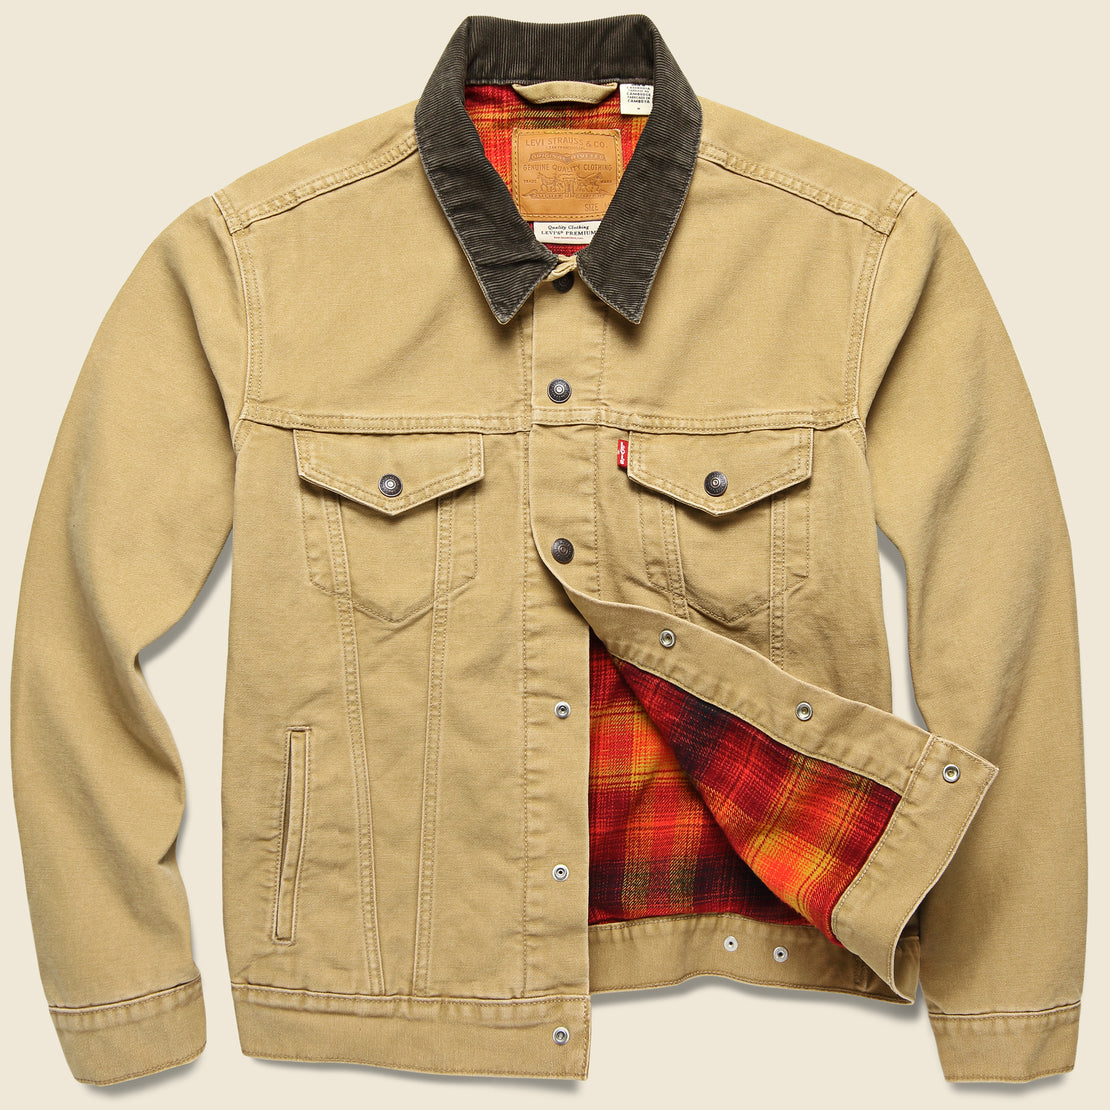 Lined Trucker Jacket - Dijon Canvas - Levis Premium - STAG Provisions - Outerwear - Coat / Jacket